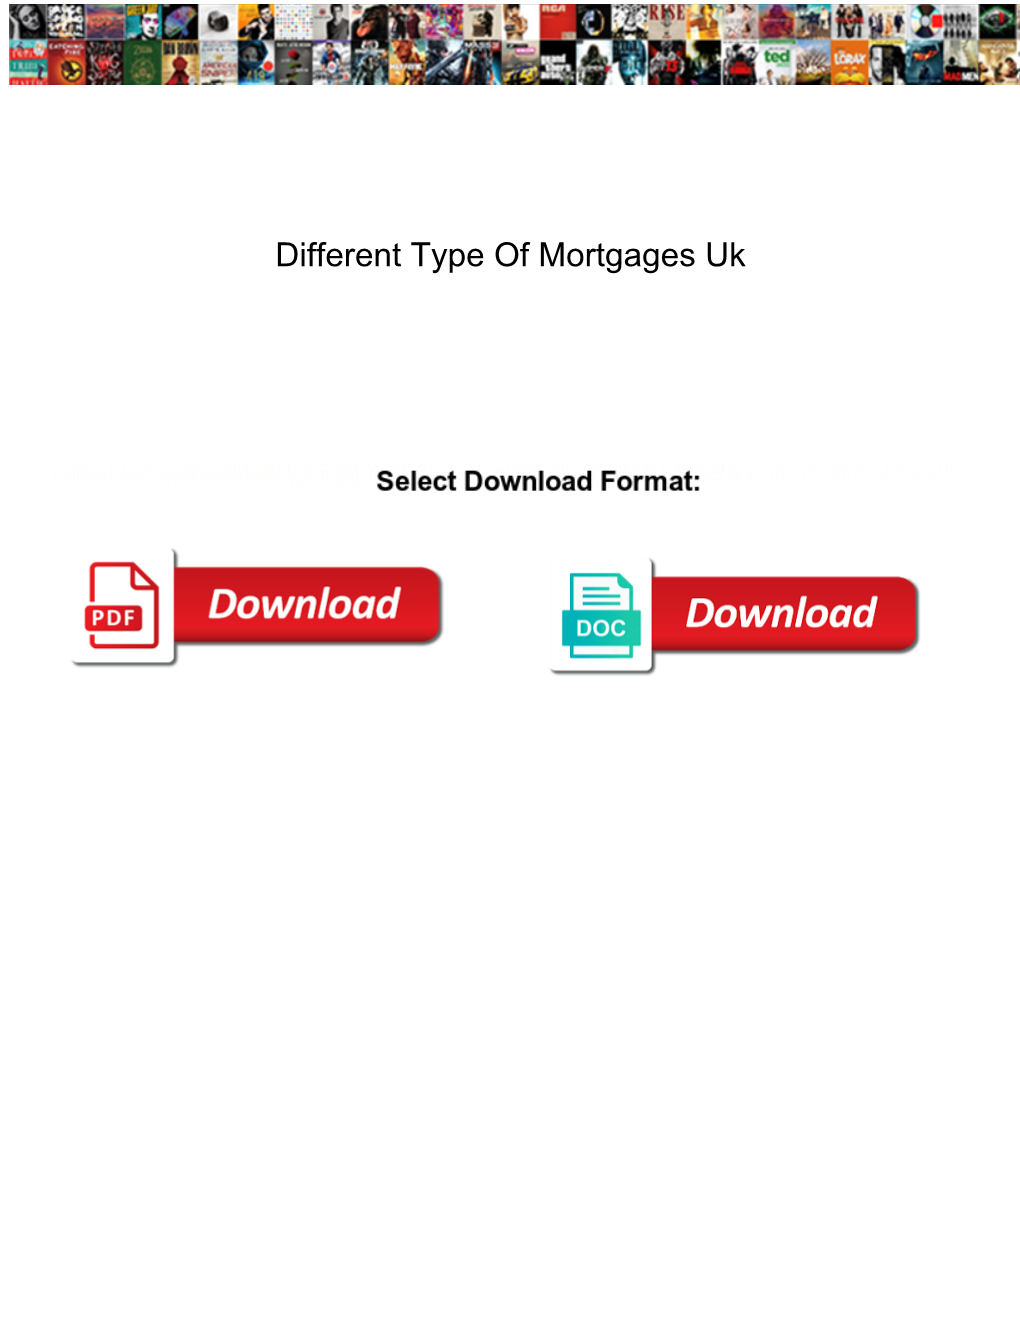 Different Type of Mortgages Uk